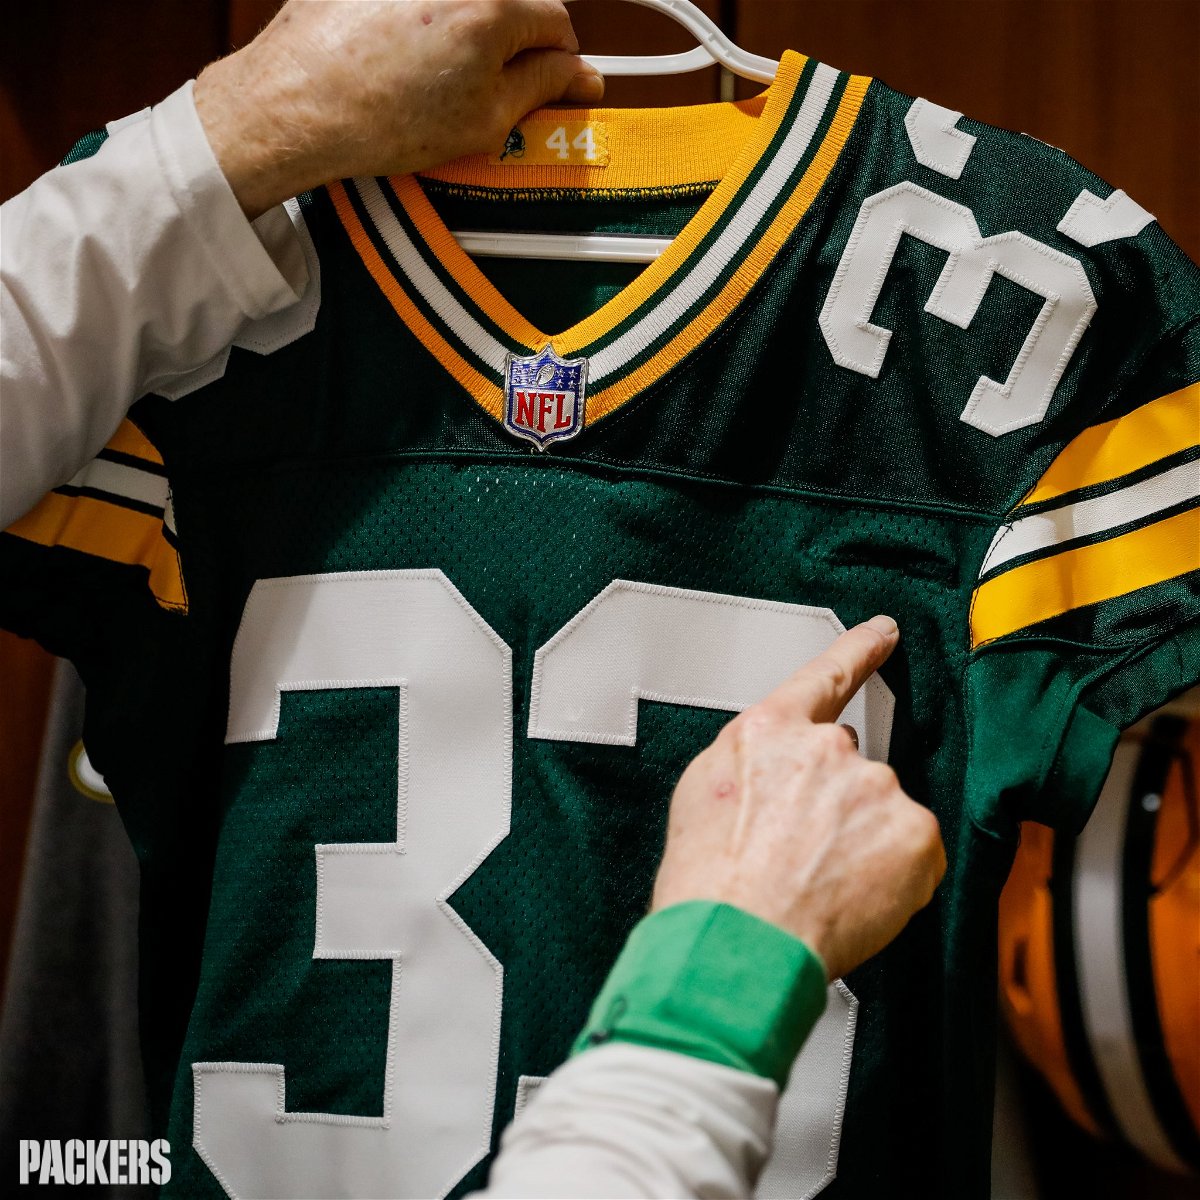 A Packers staff member points to pocket added to Aaron Jones' jersey.